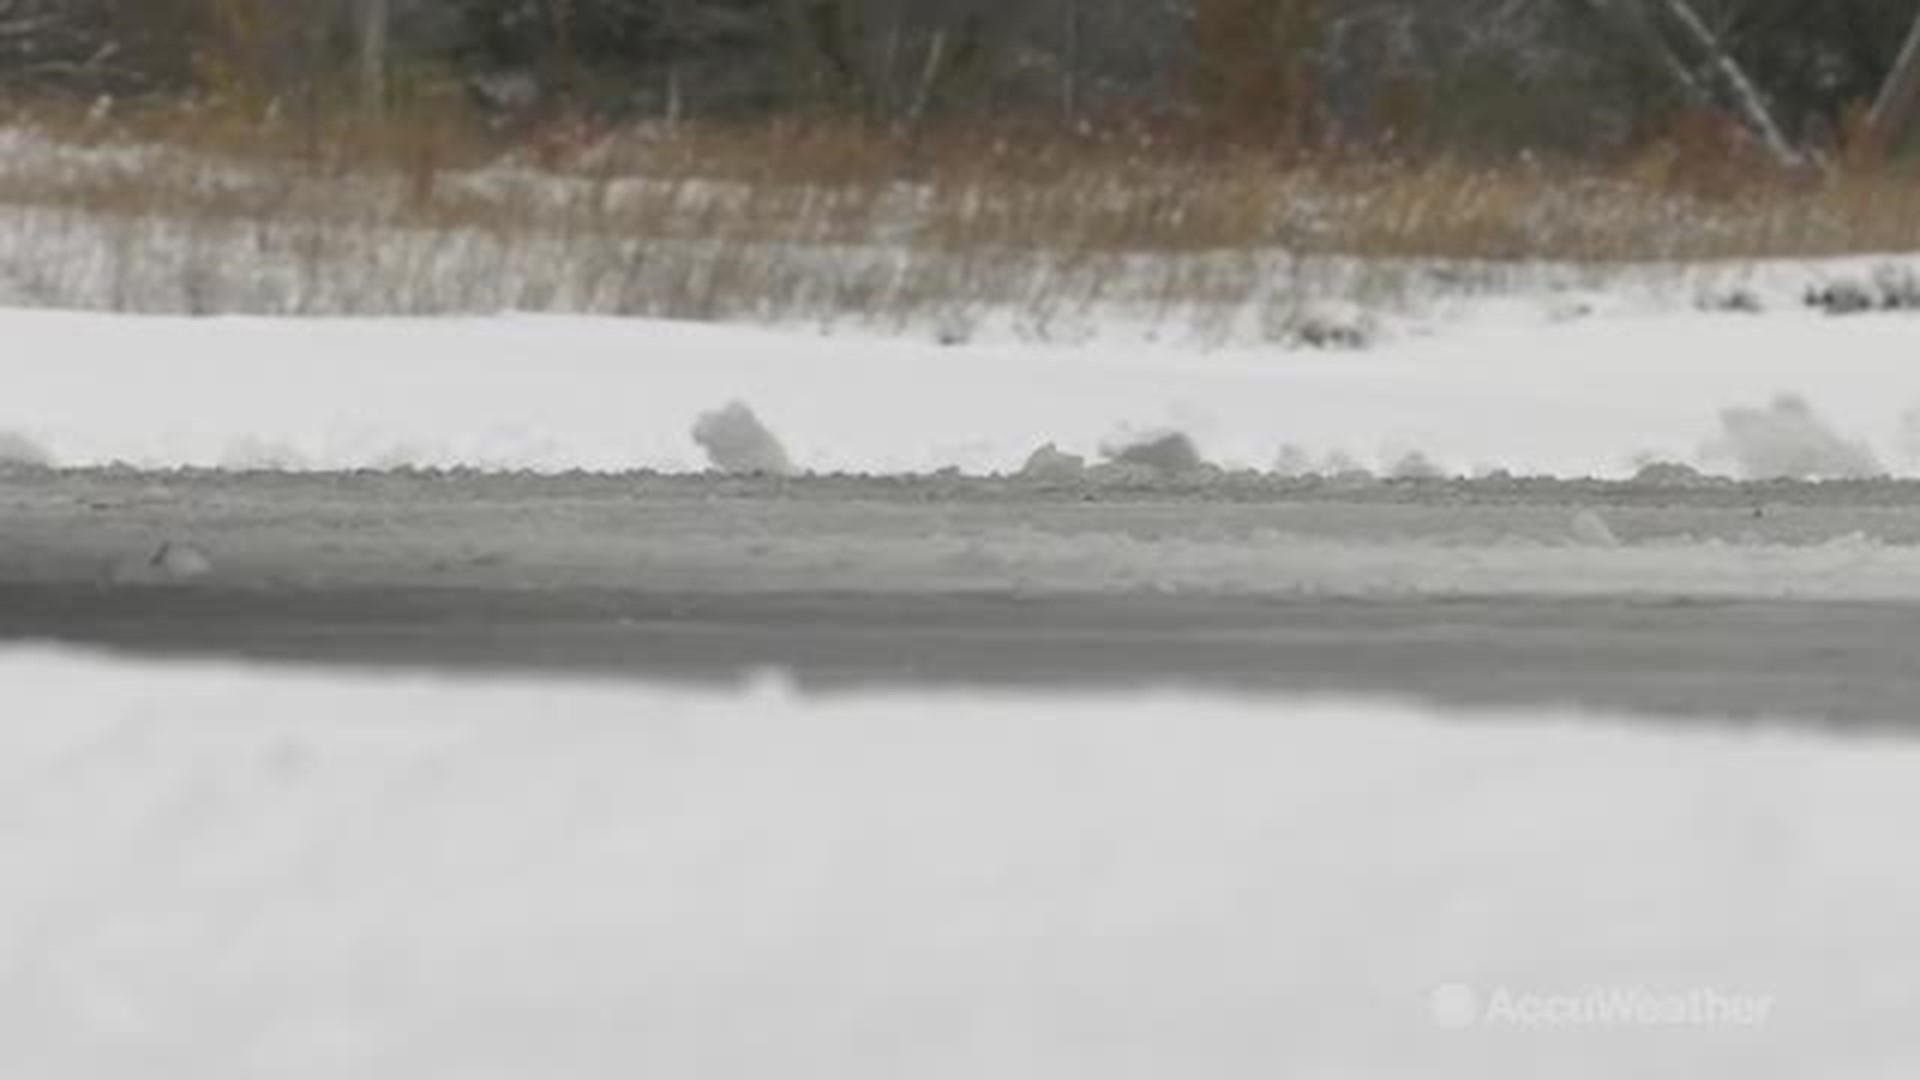 Kalamazoo County, Michigan saw lake-effect snow accumulations of 3-5 inches that caused icy, slick road conditions.  Clean-up now begins in the aftermath.